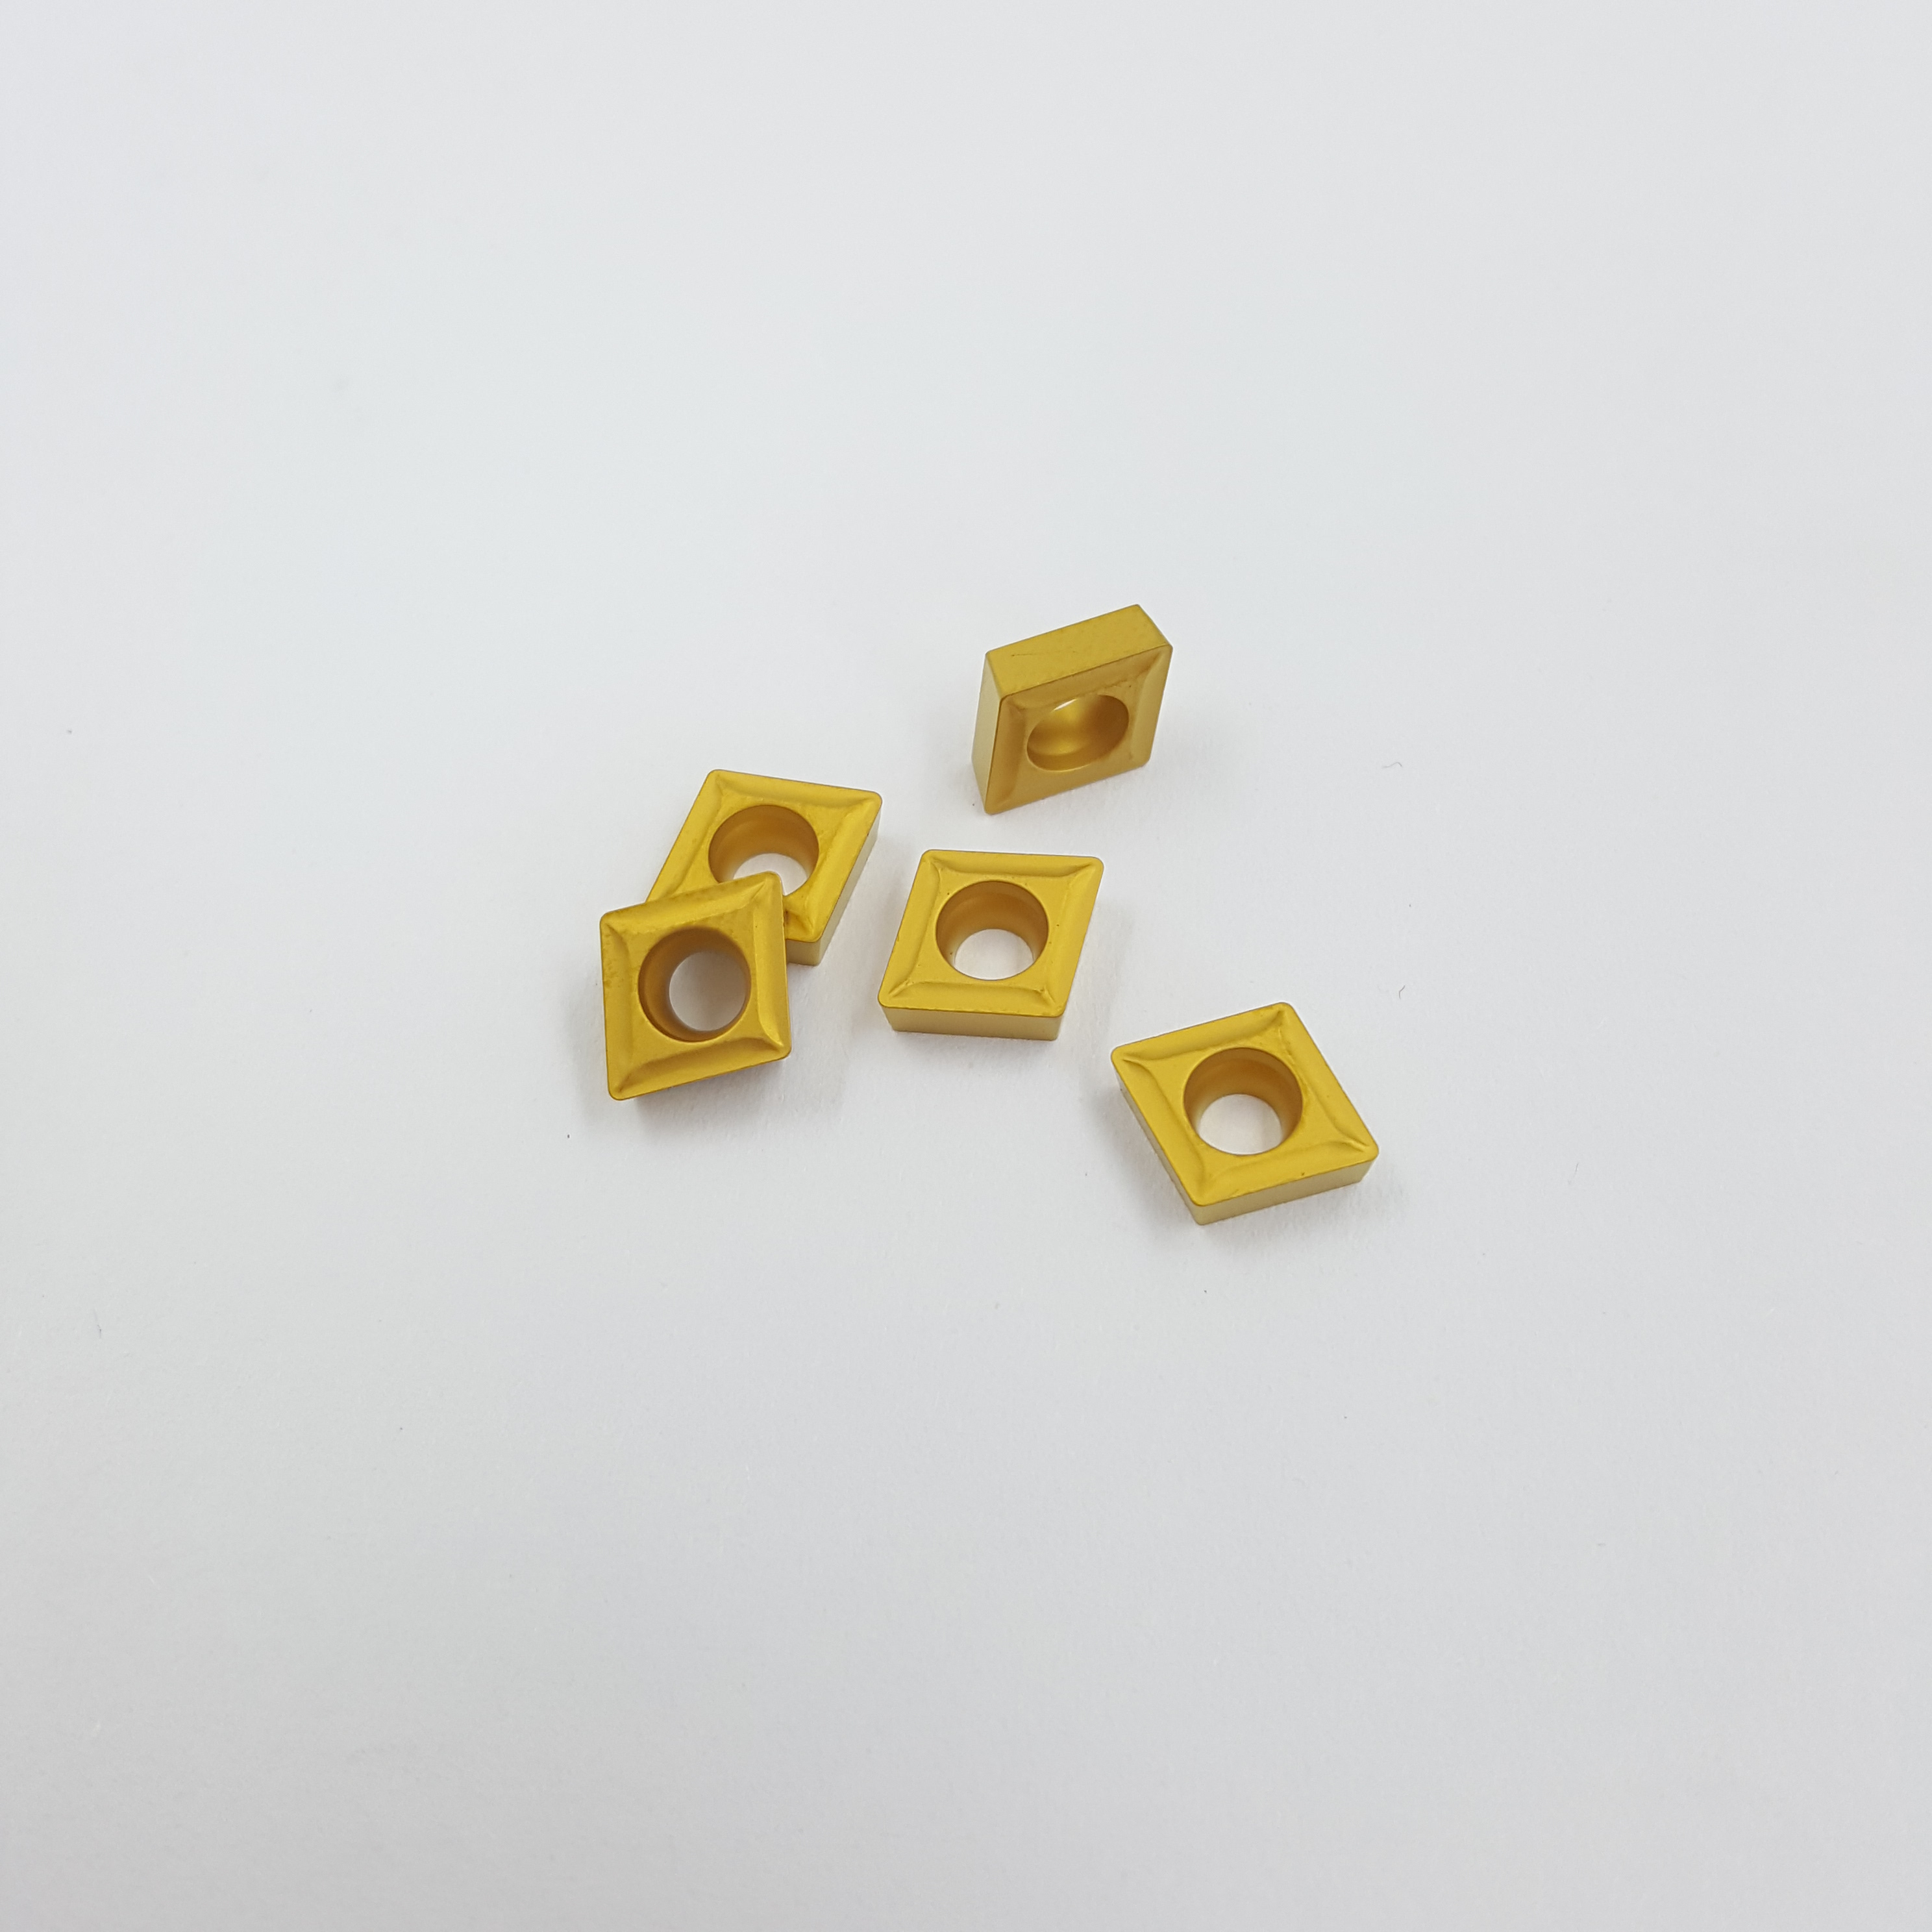  WITAIK high quality turning insert CCMT060204-53 WP6251 Suitable for semi-processing of steel parts